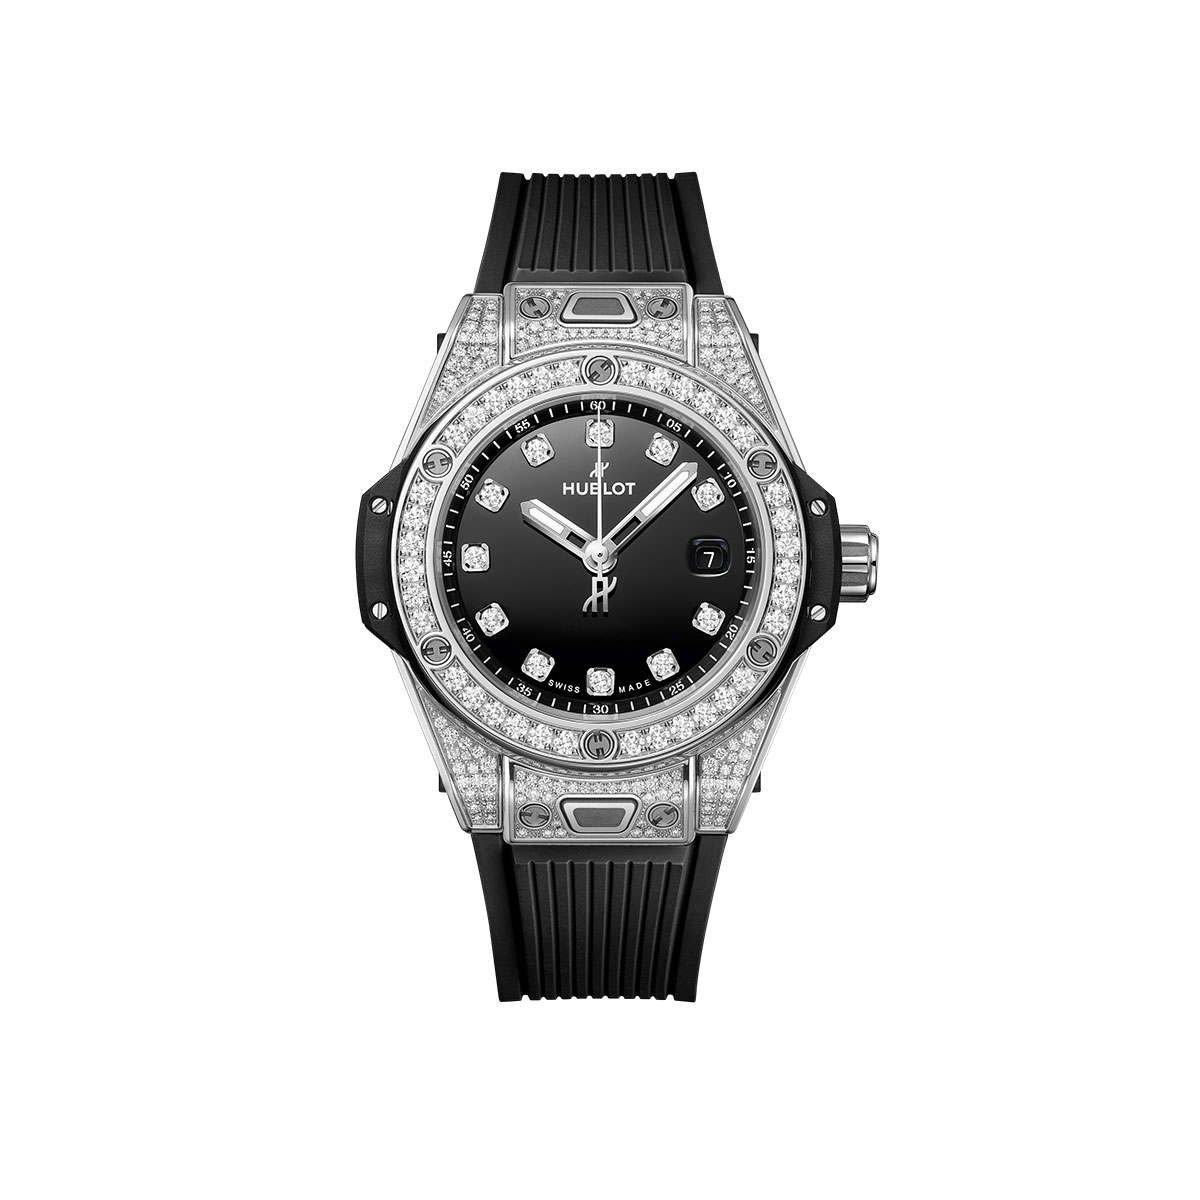 Hublot One Click Steel Pave 33mm watch 485.SX.1270.RX.1604